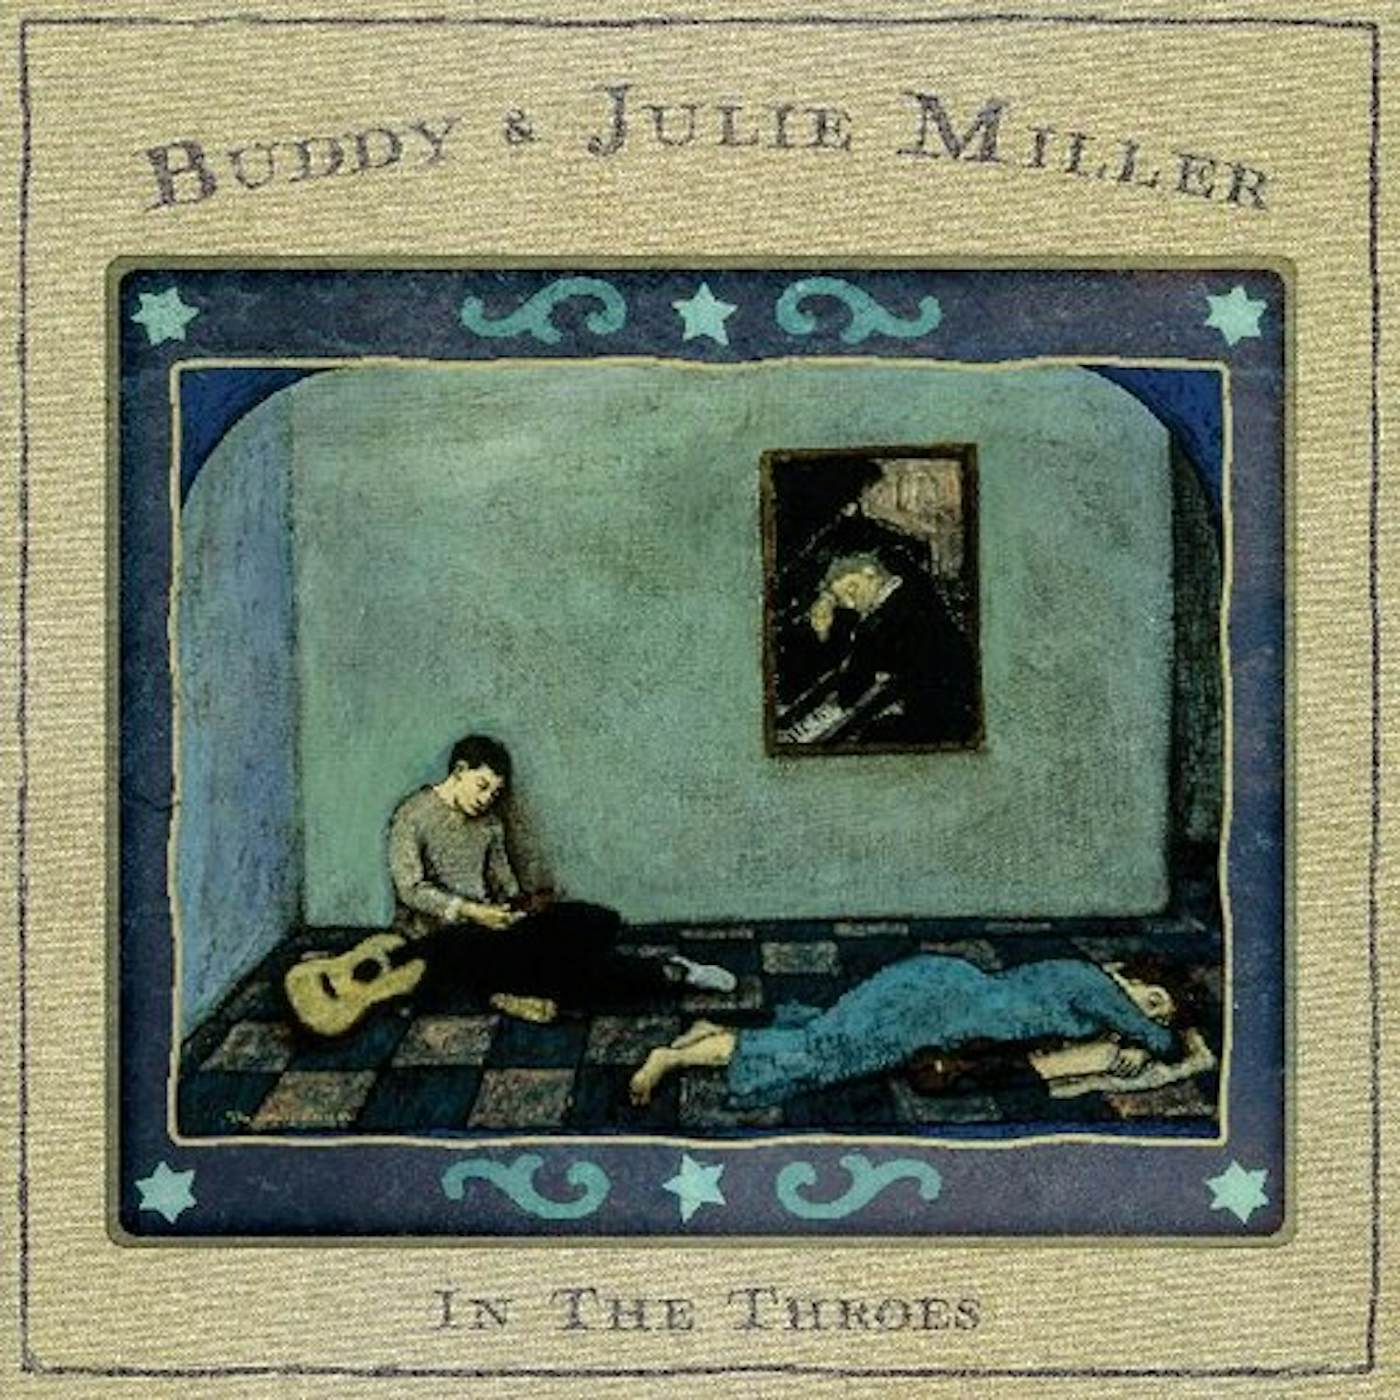 Buddy & Julie Miller IN THE THROES CD